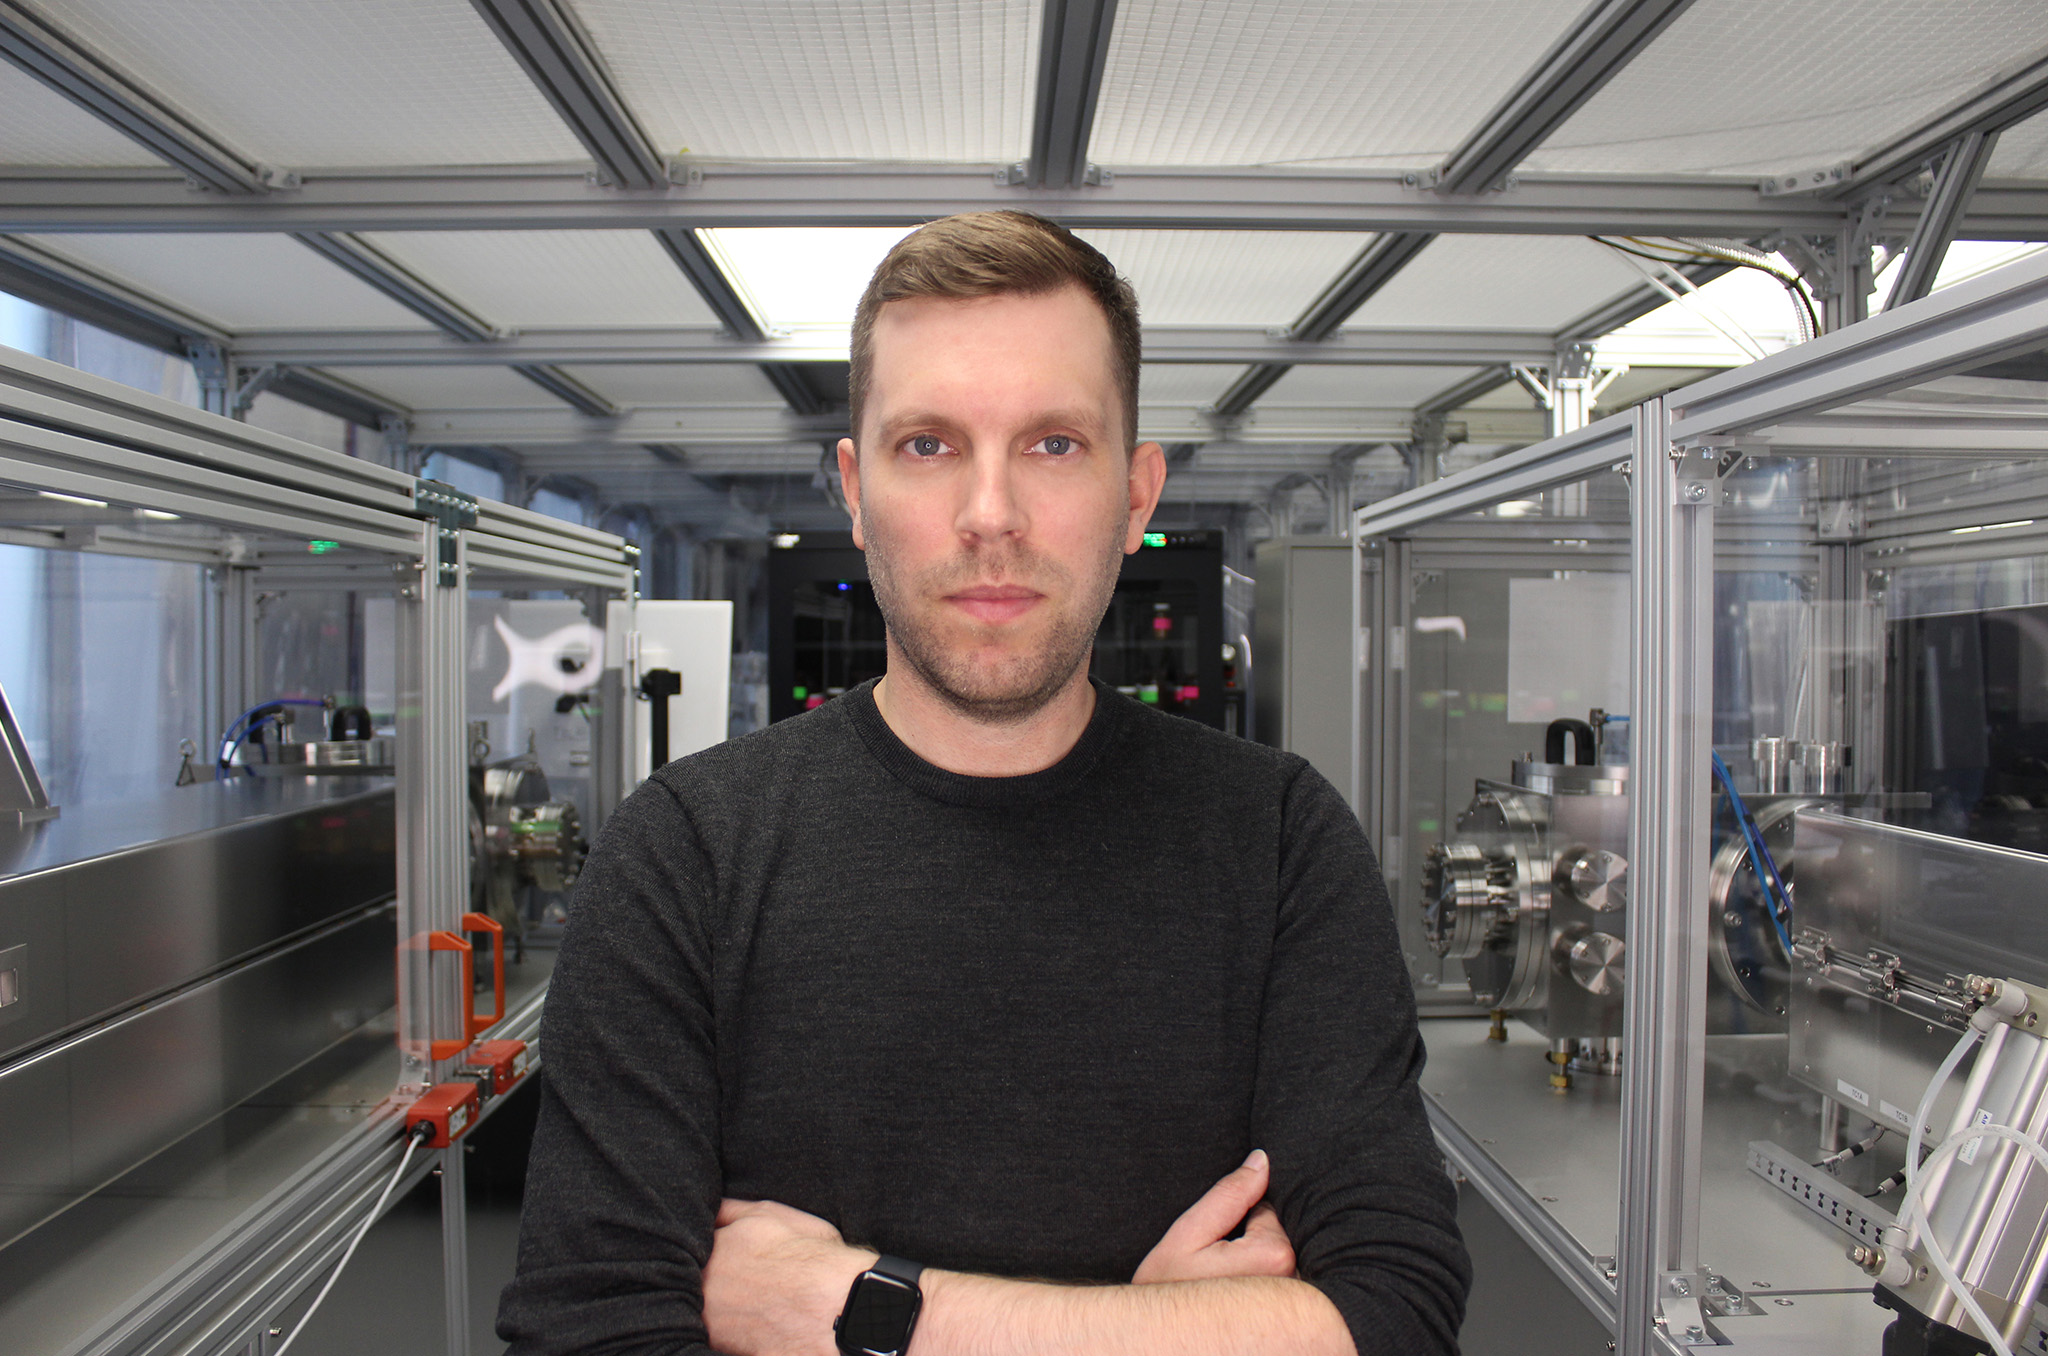 OTI co-founder and CEO Michael G. Helander in front of equipment